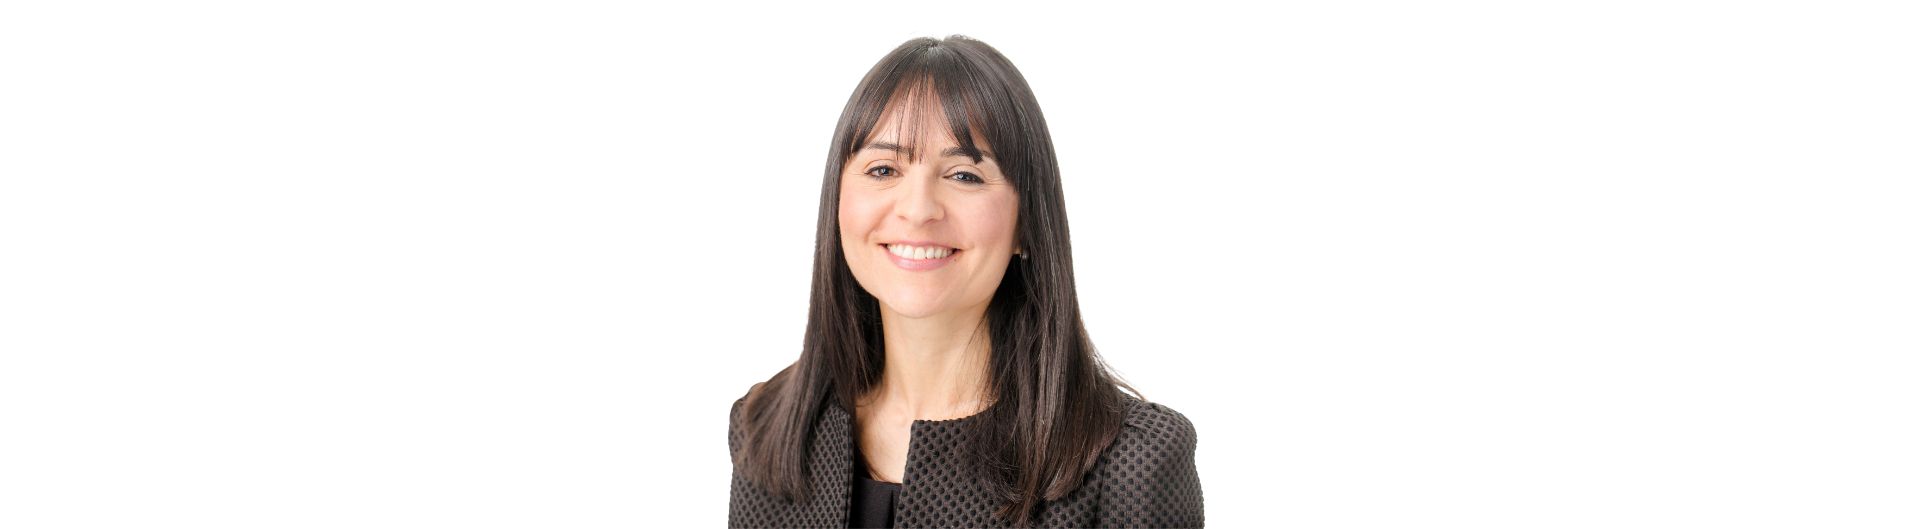 Gabriella Alberici, ICC Sydney's Senior Manager, Business Development – Corporate, Government and Events.